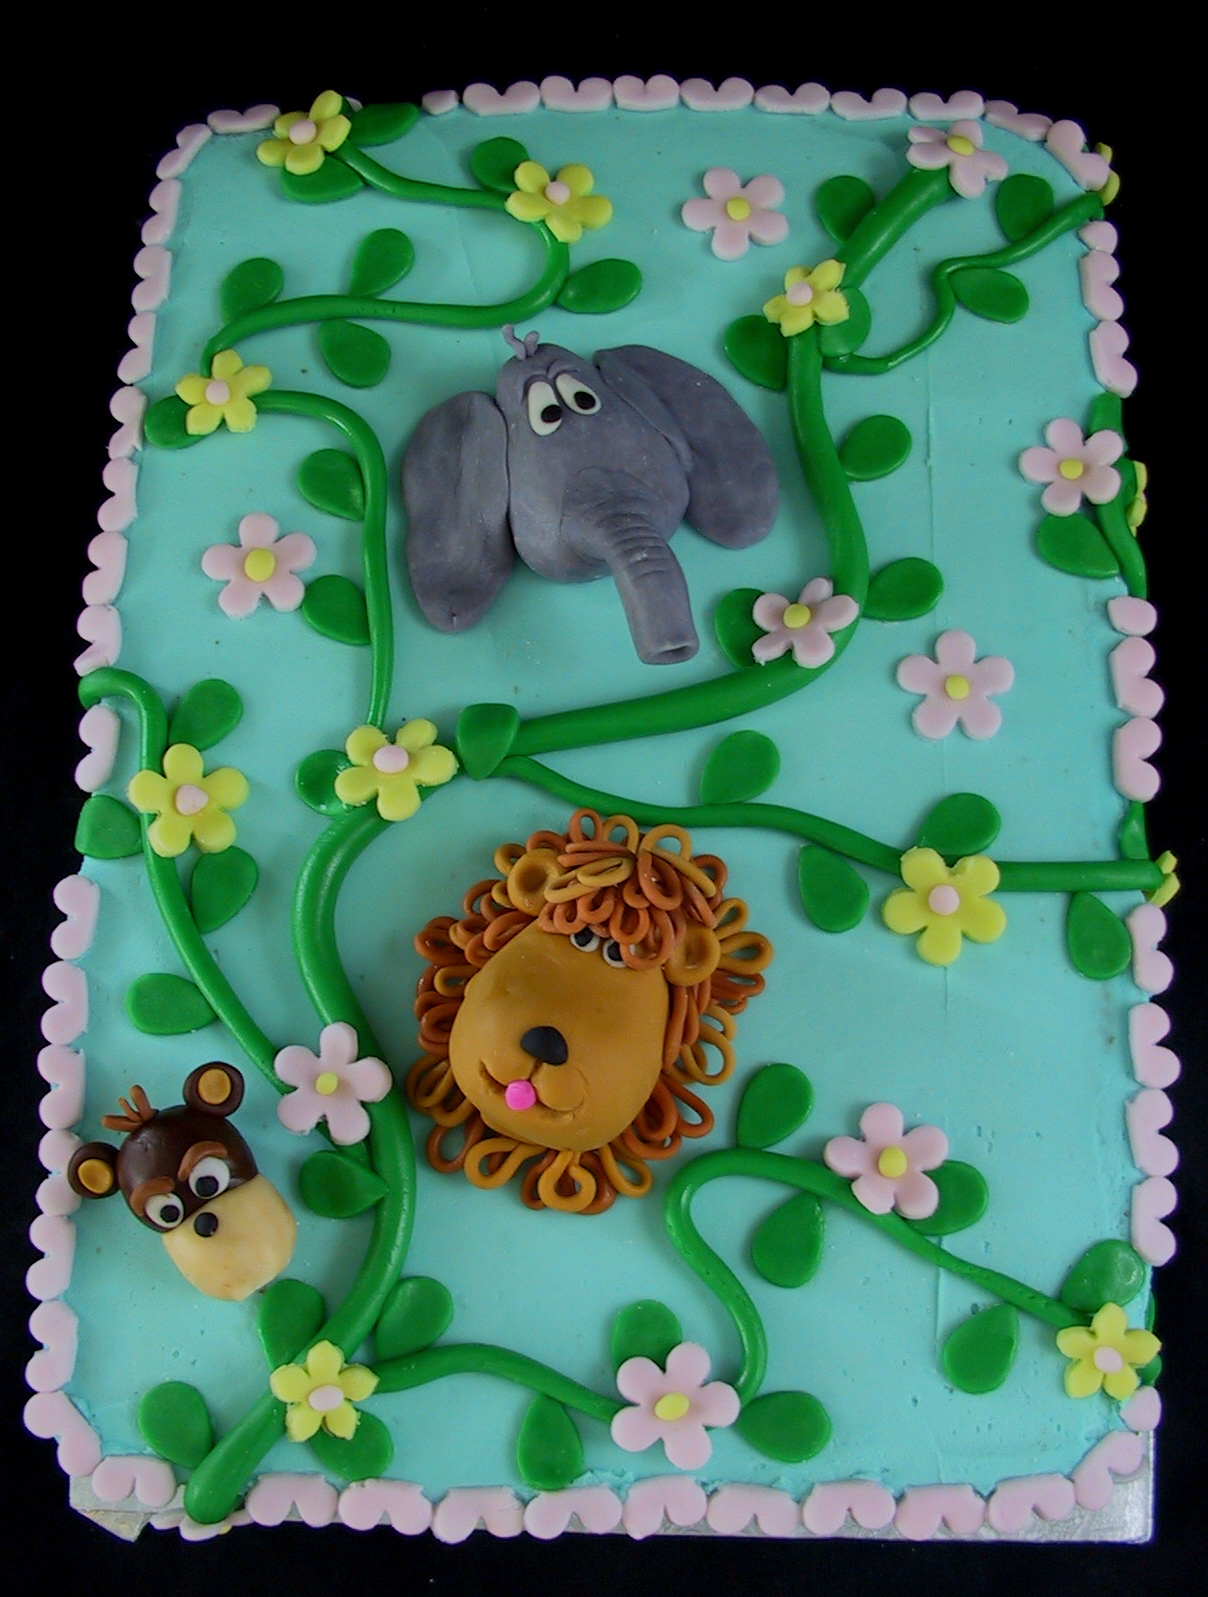 Jungle Birthday Cake – Perryville, KY October 7, 2009